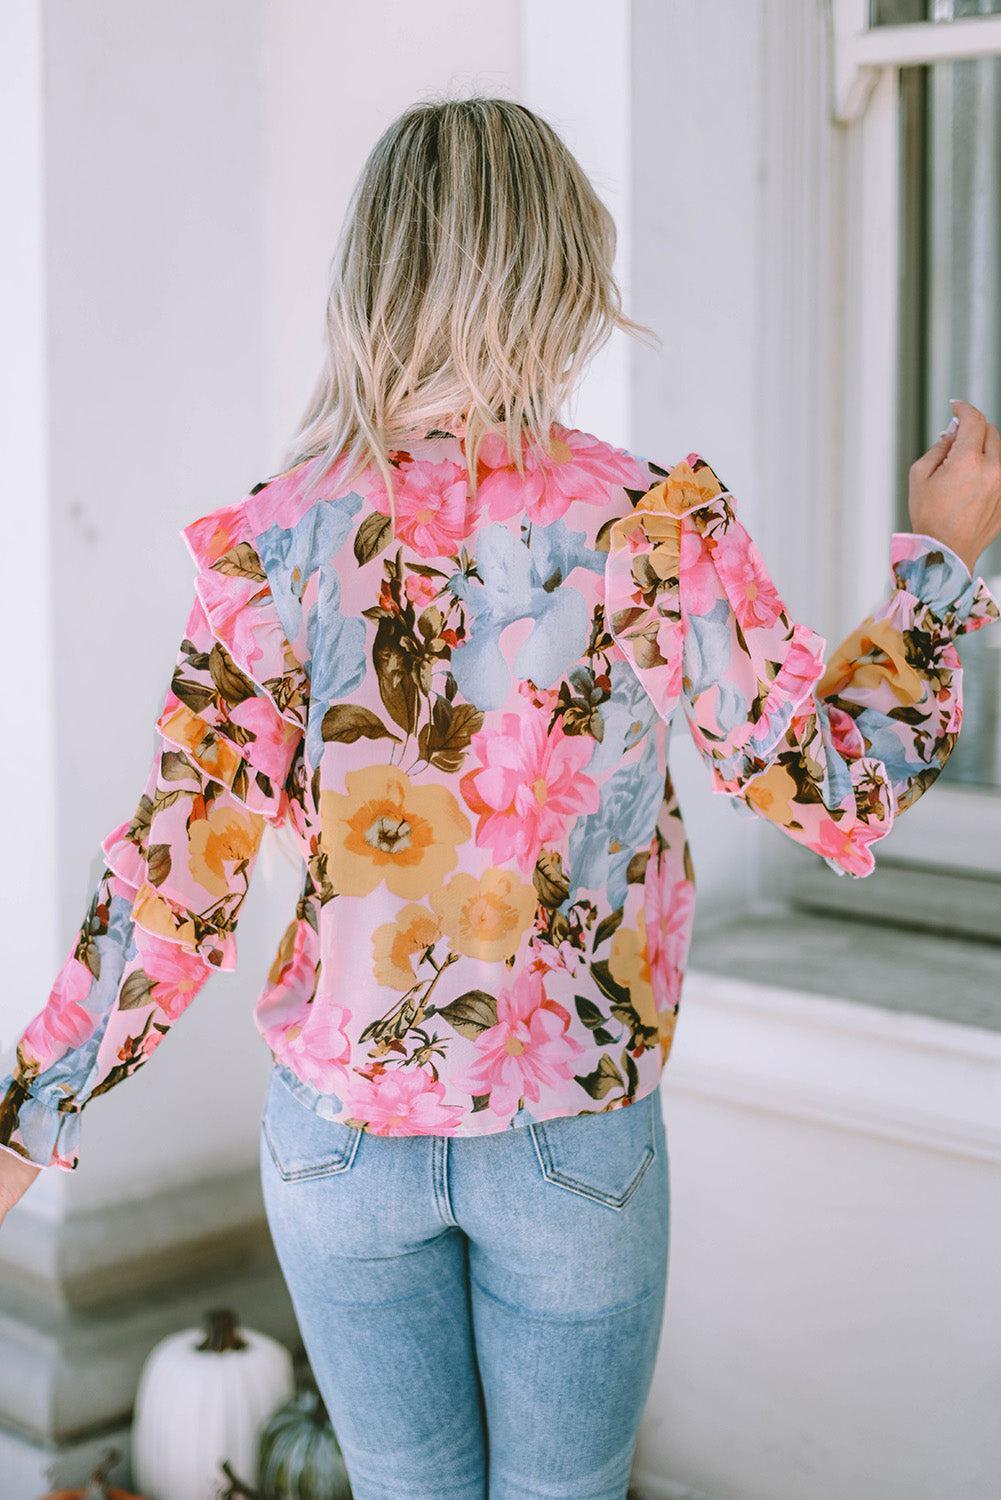 a woman in jeans and a floral shirt